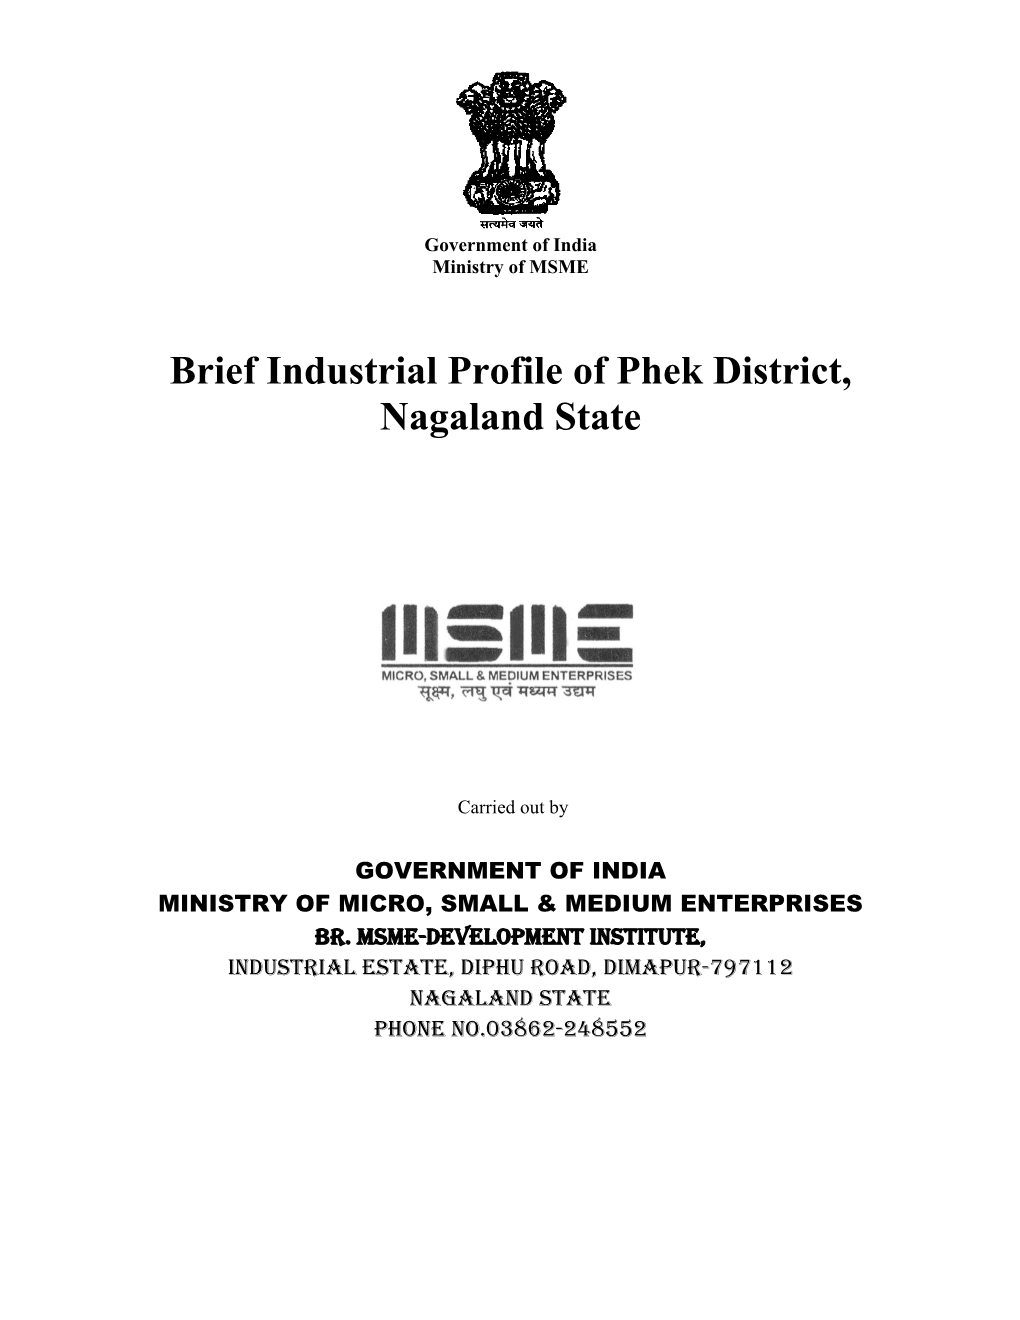 Brief Industrial Profile of Phek District, Nagaland State